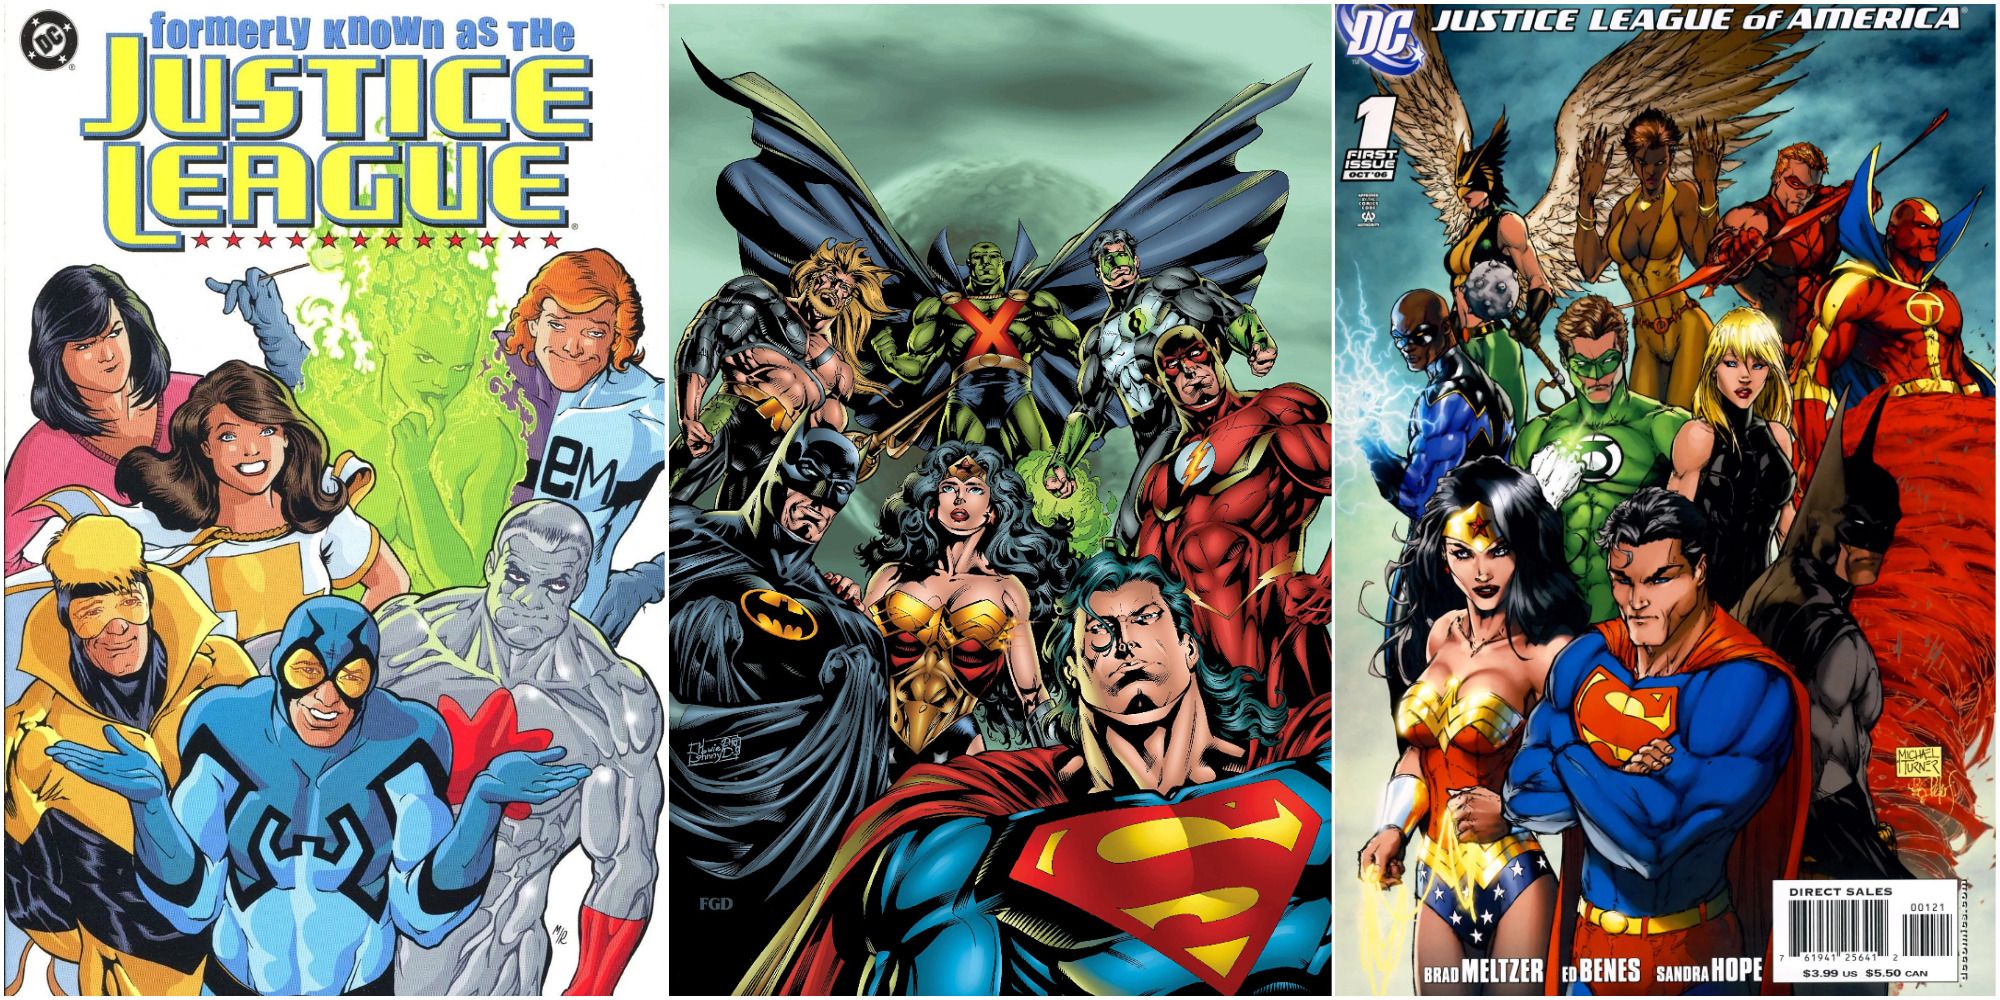 Formally Known As The Justice League, JLA New World Order, Justice League of America The Tornado's Path